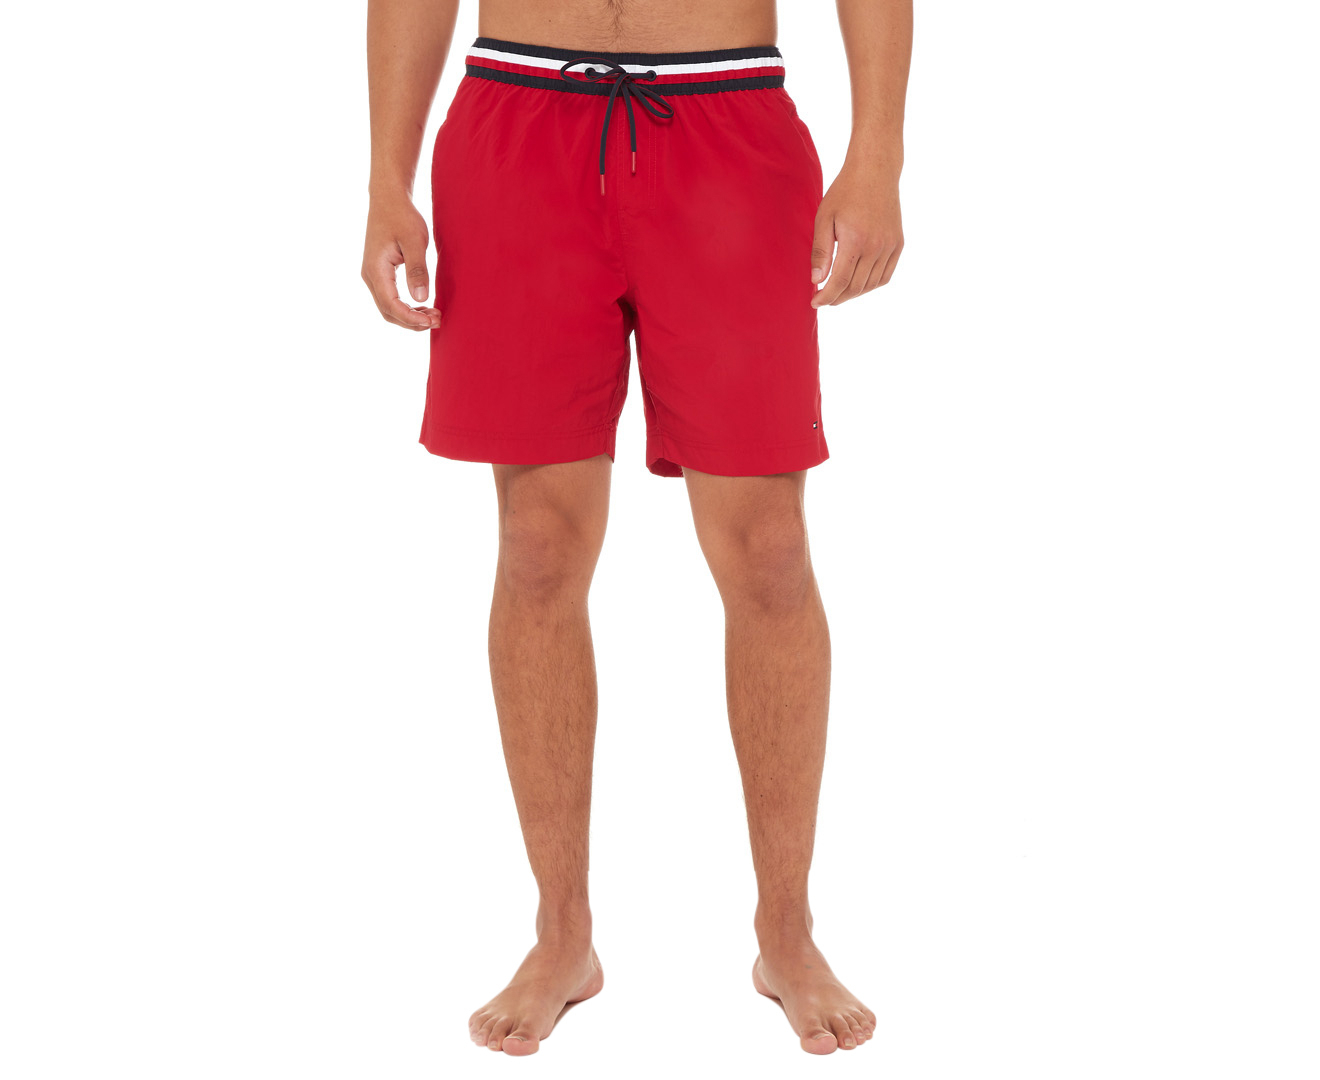 Ex Store New Without Tags Mens Dylan Swim Shorts Swimwear Trunks 